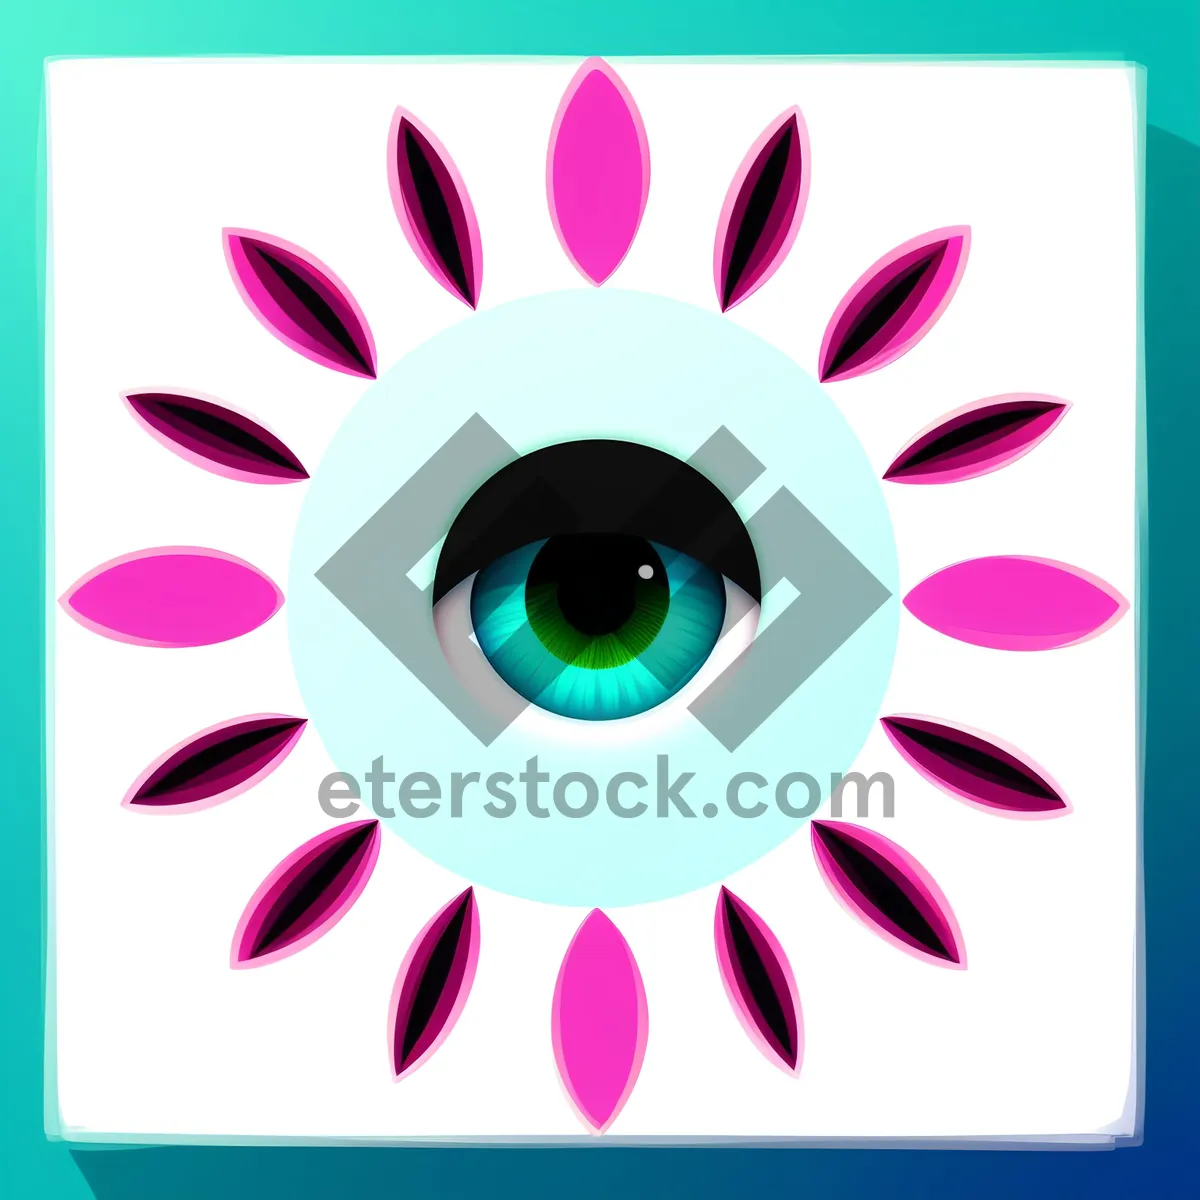 Picture of Floral Eyebrow Design Icon – Artistic Graphic Element